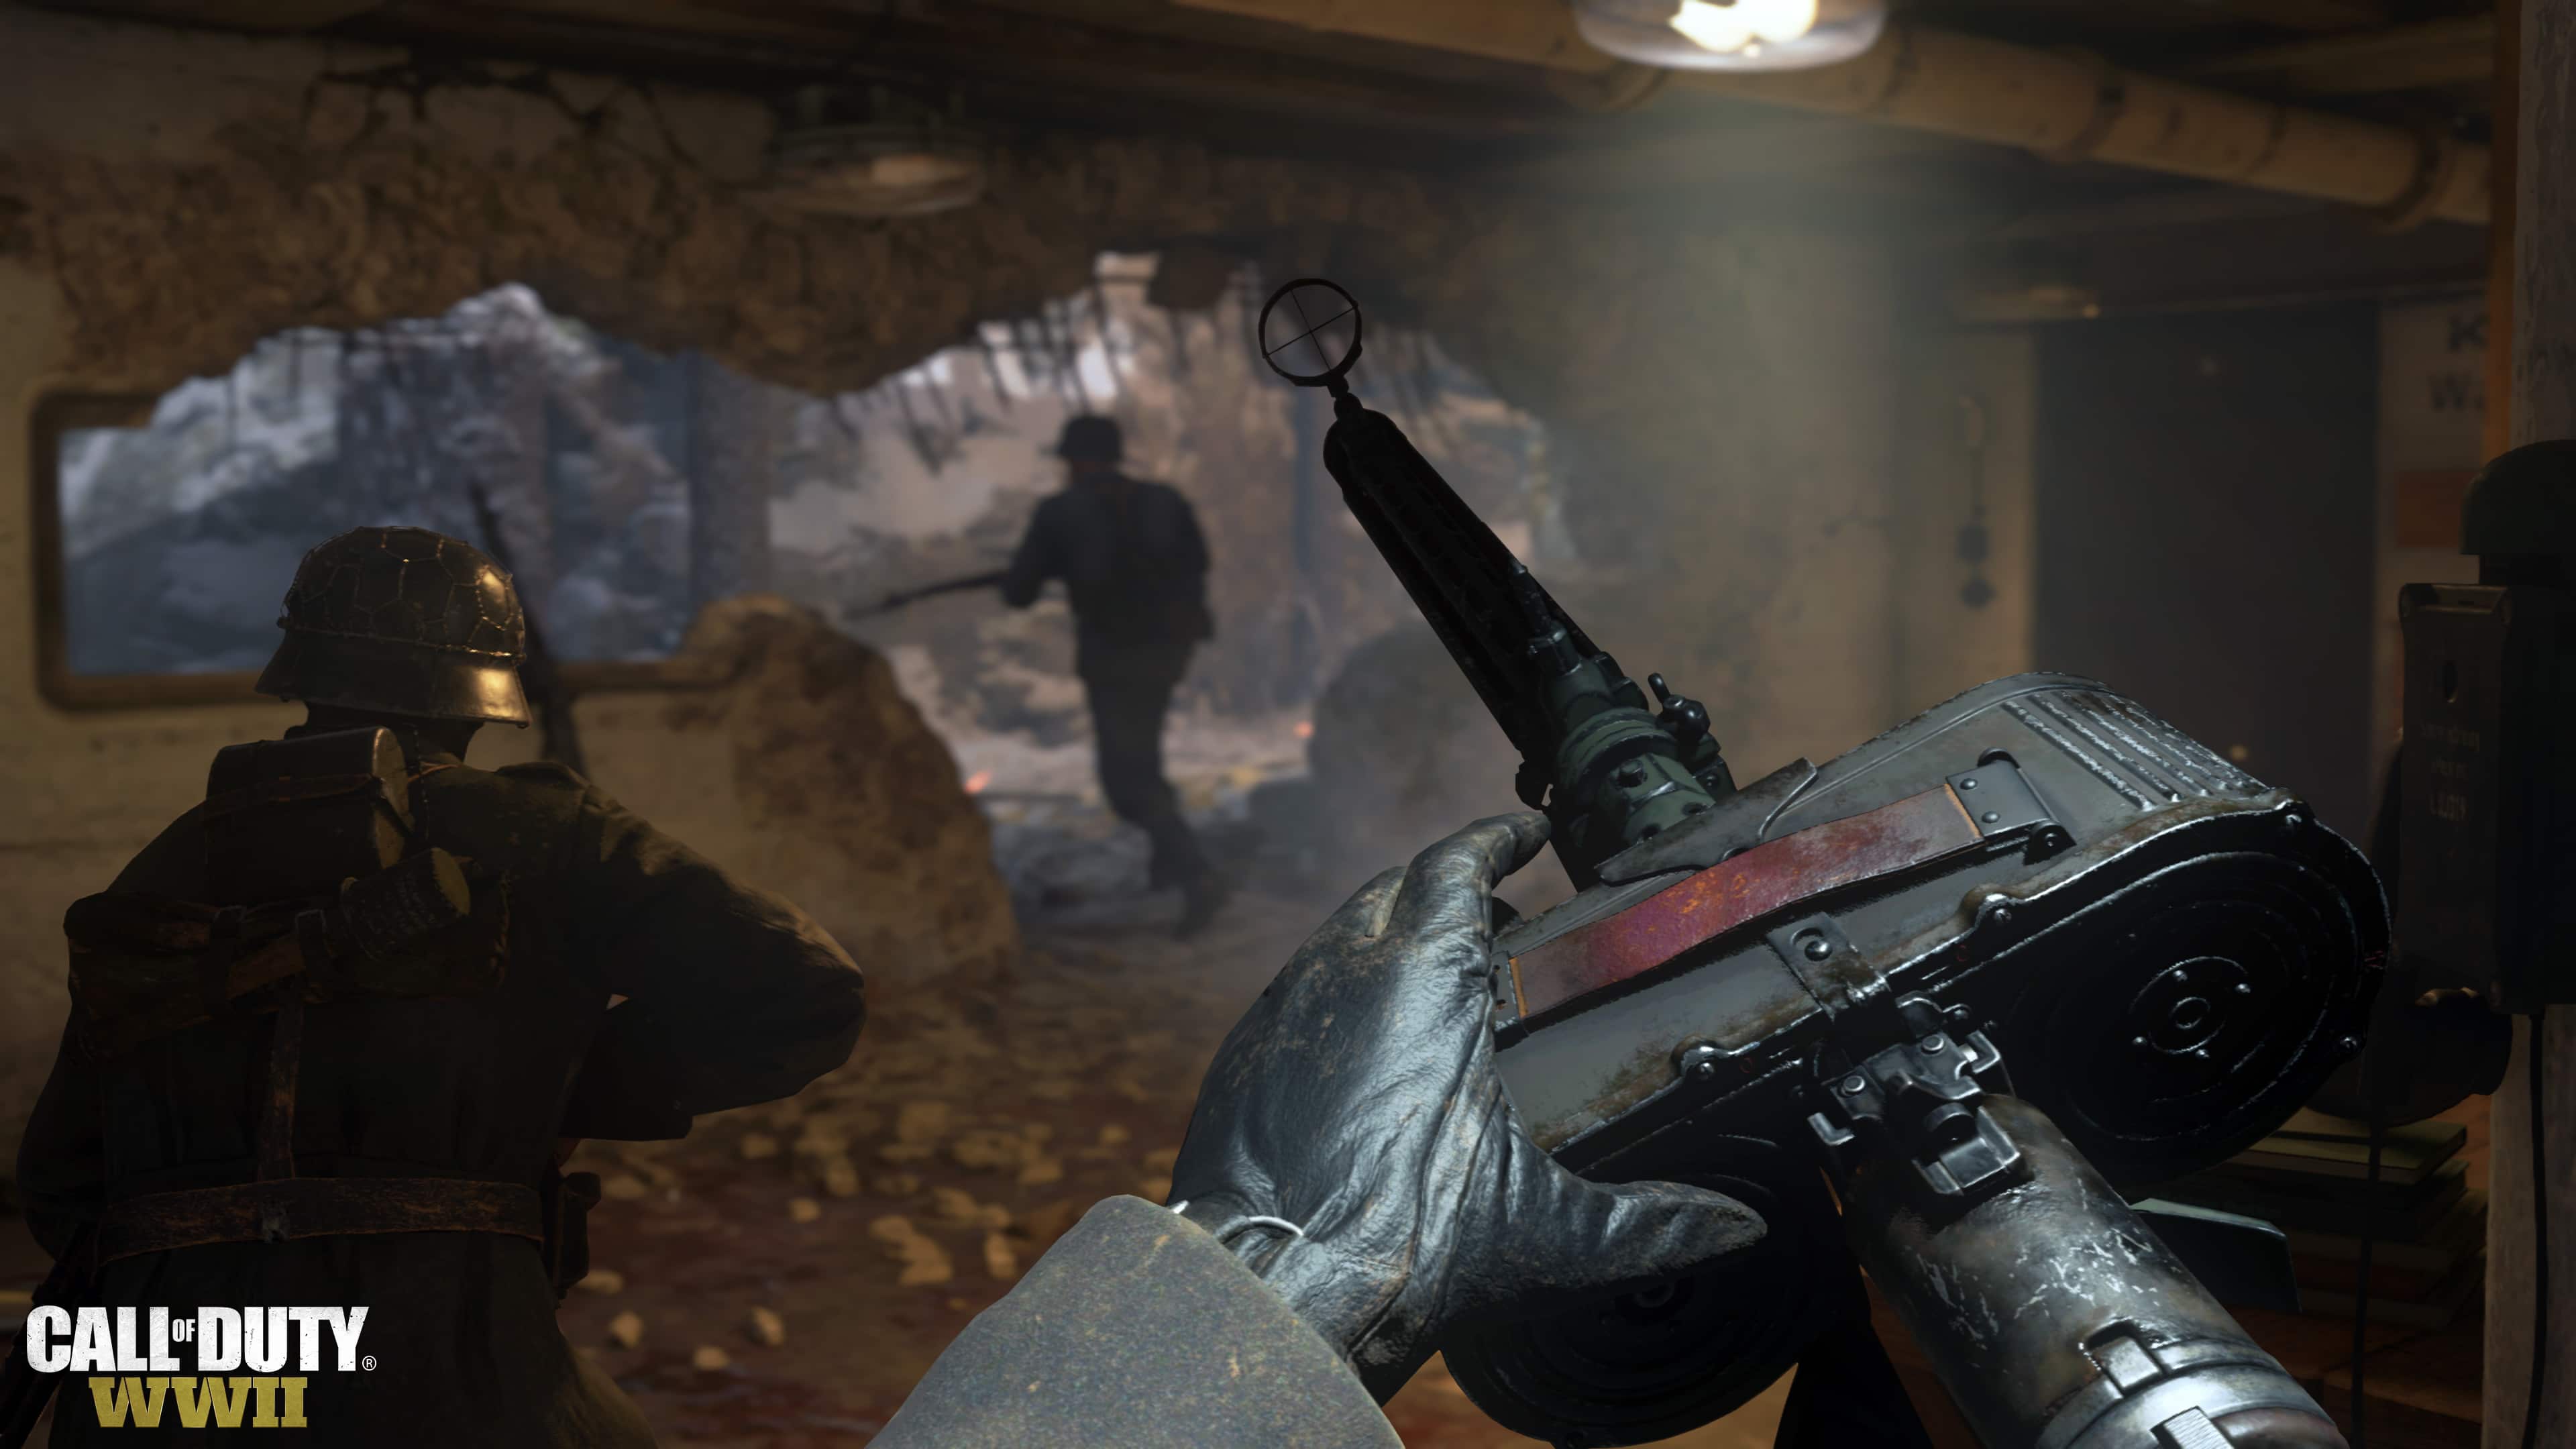 First-person view in Call of Duty WWII video game scene.First-person view in Call of Duty WW2 video game with machine gun.